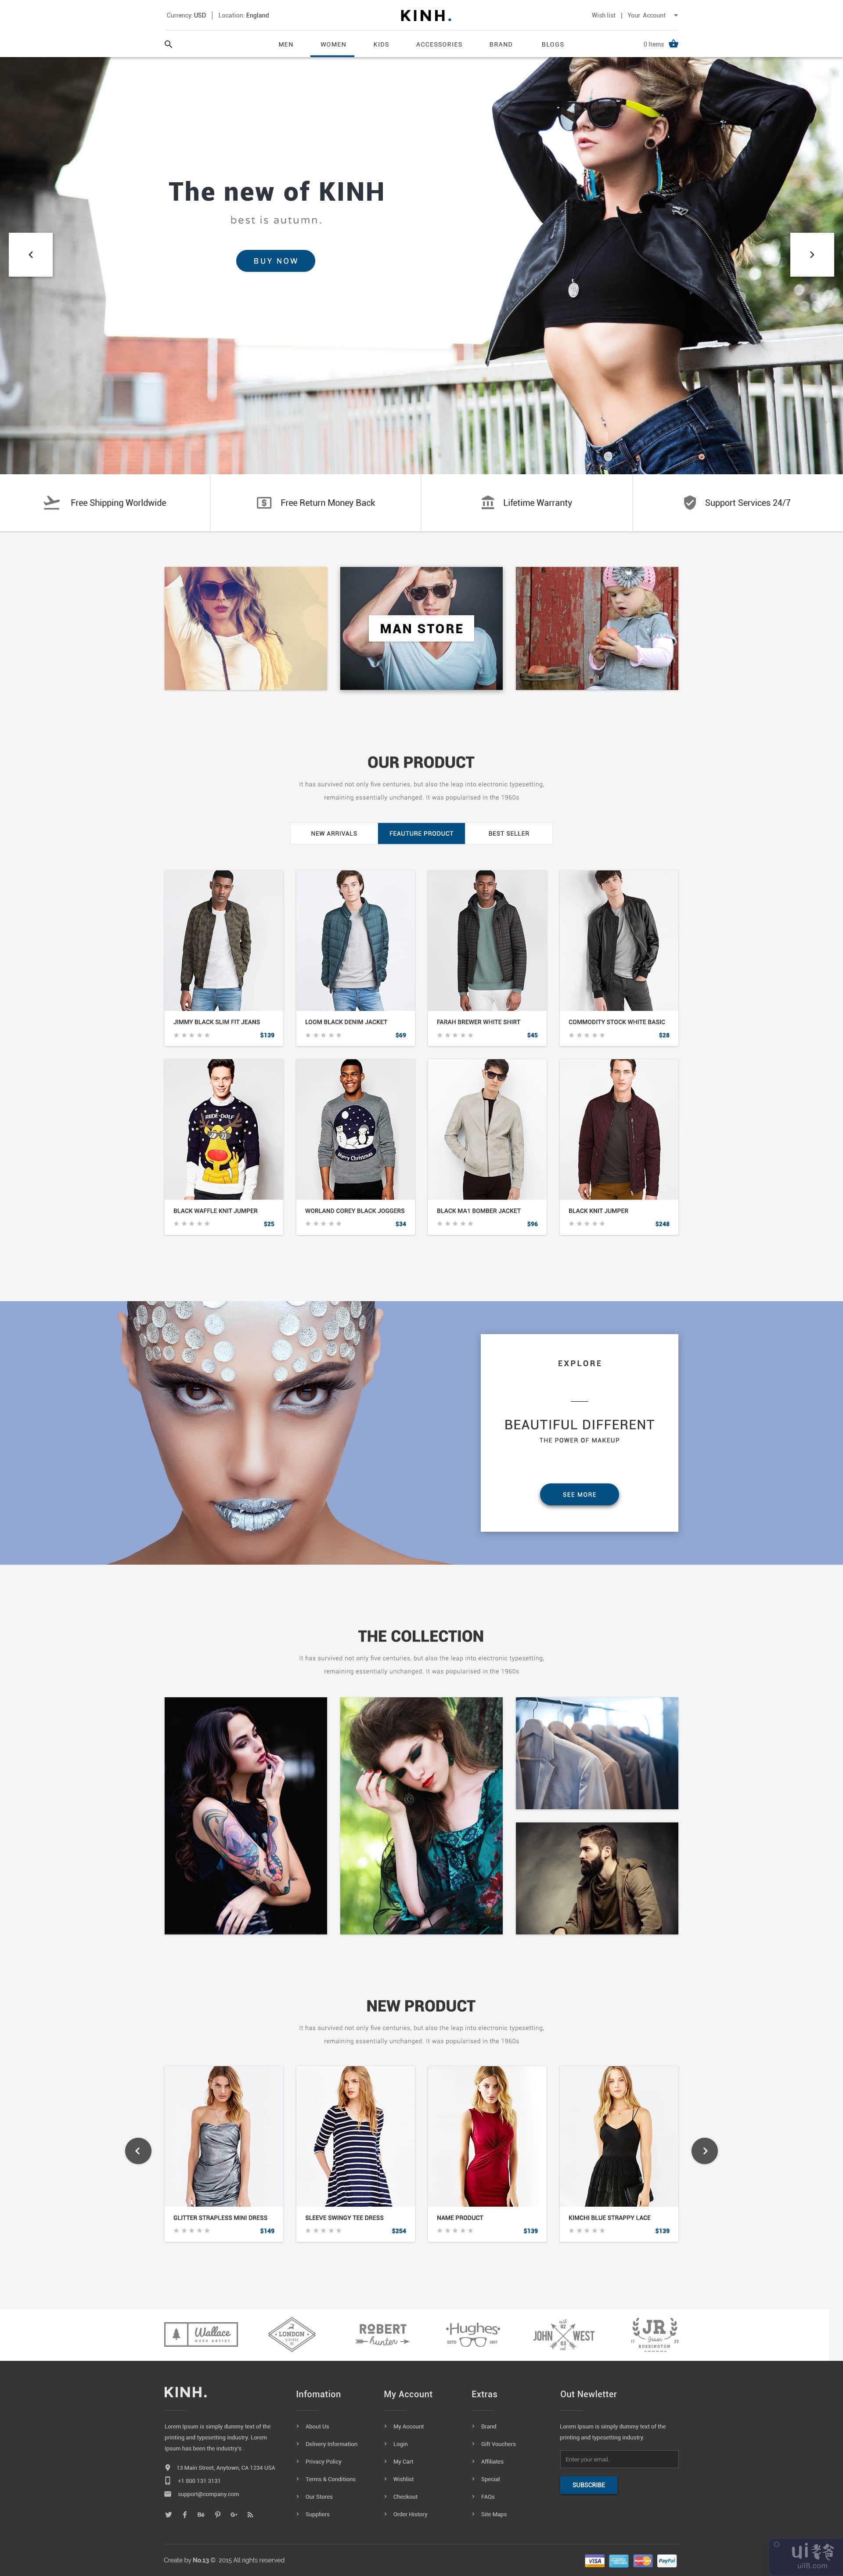 Kinh - 材料电子商务 PSD 模板(Kinh - Material E-Commerce PSD Template)插图8